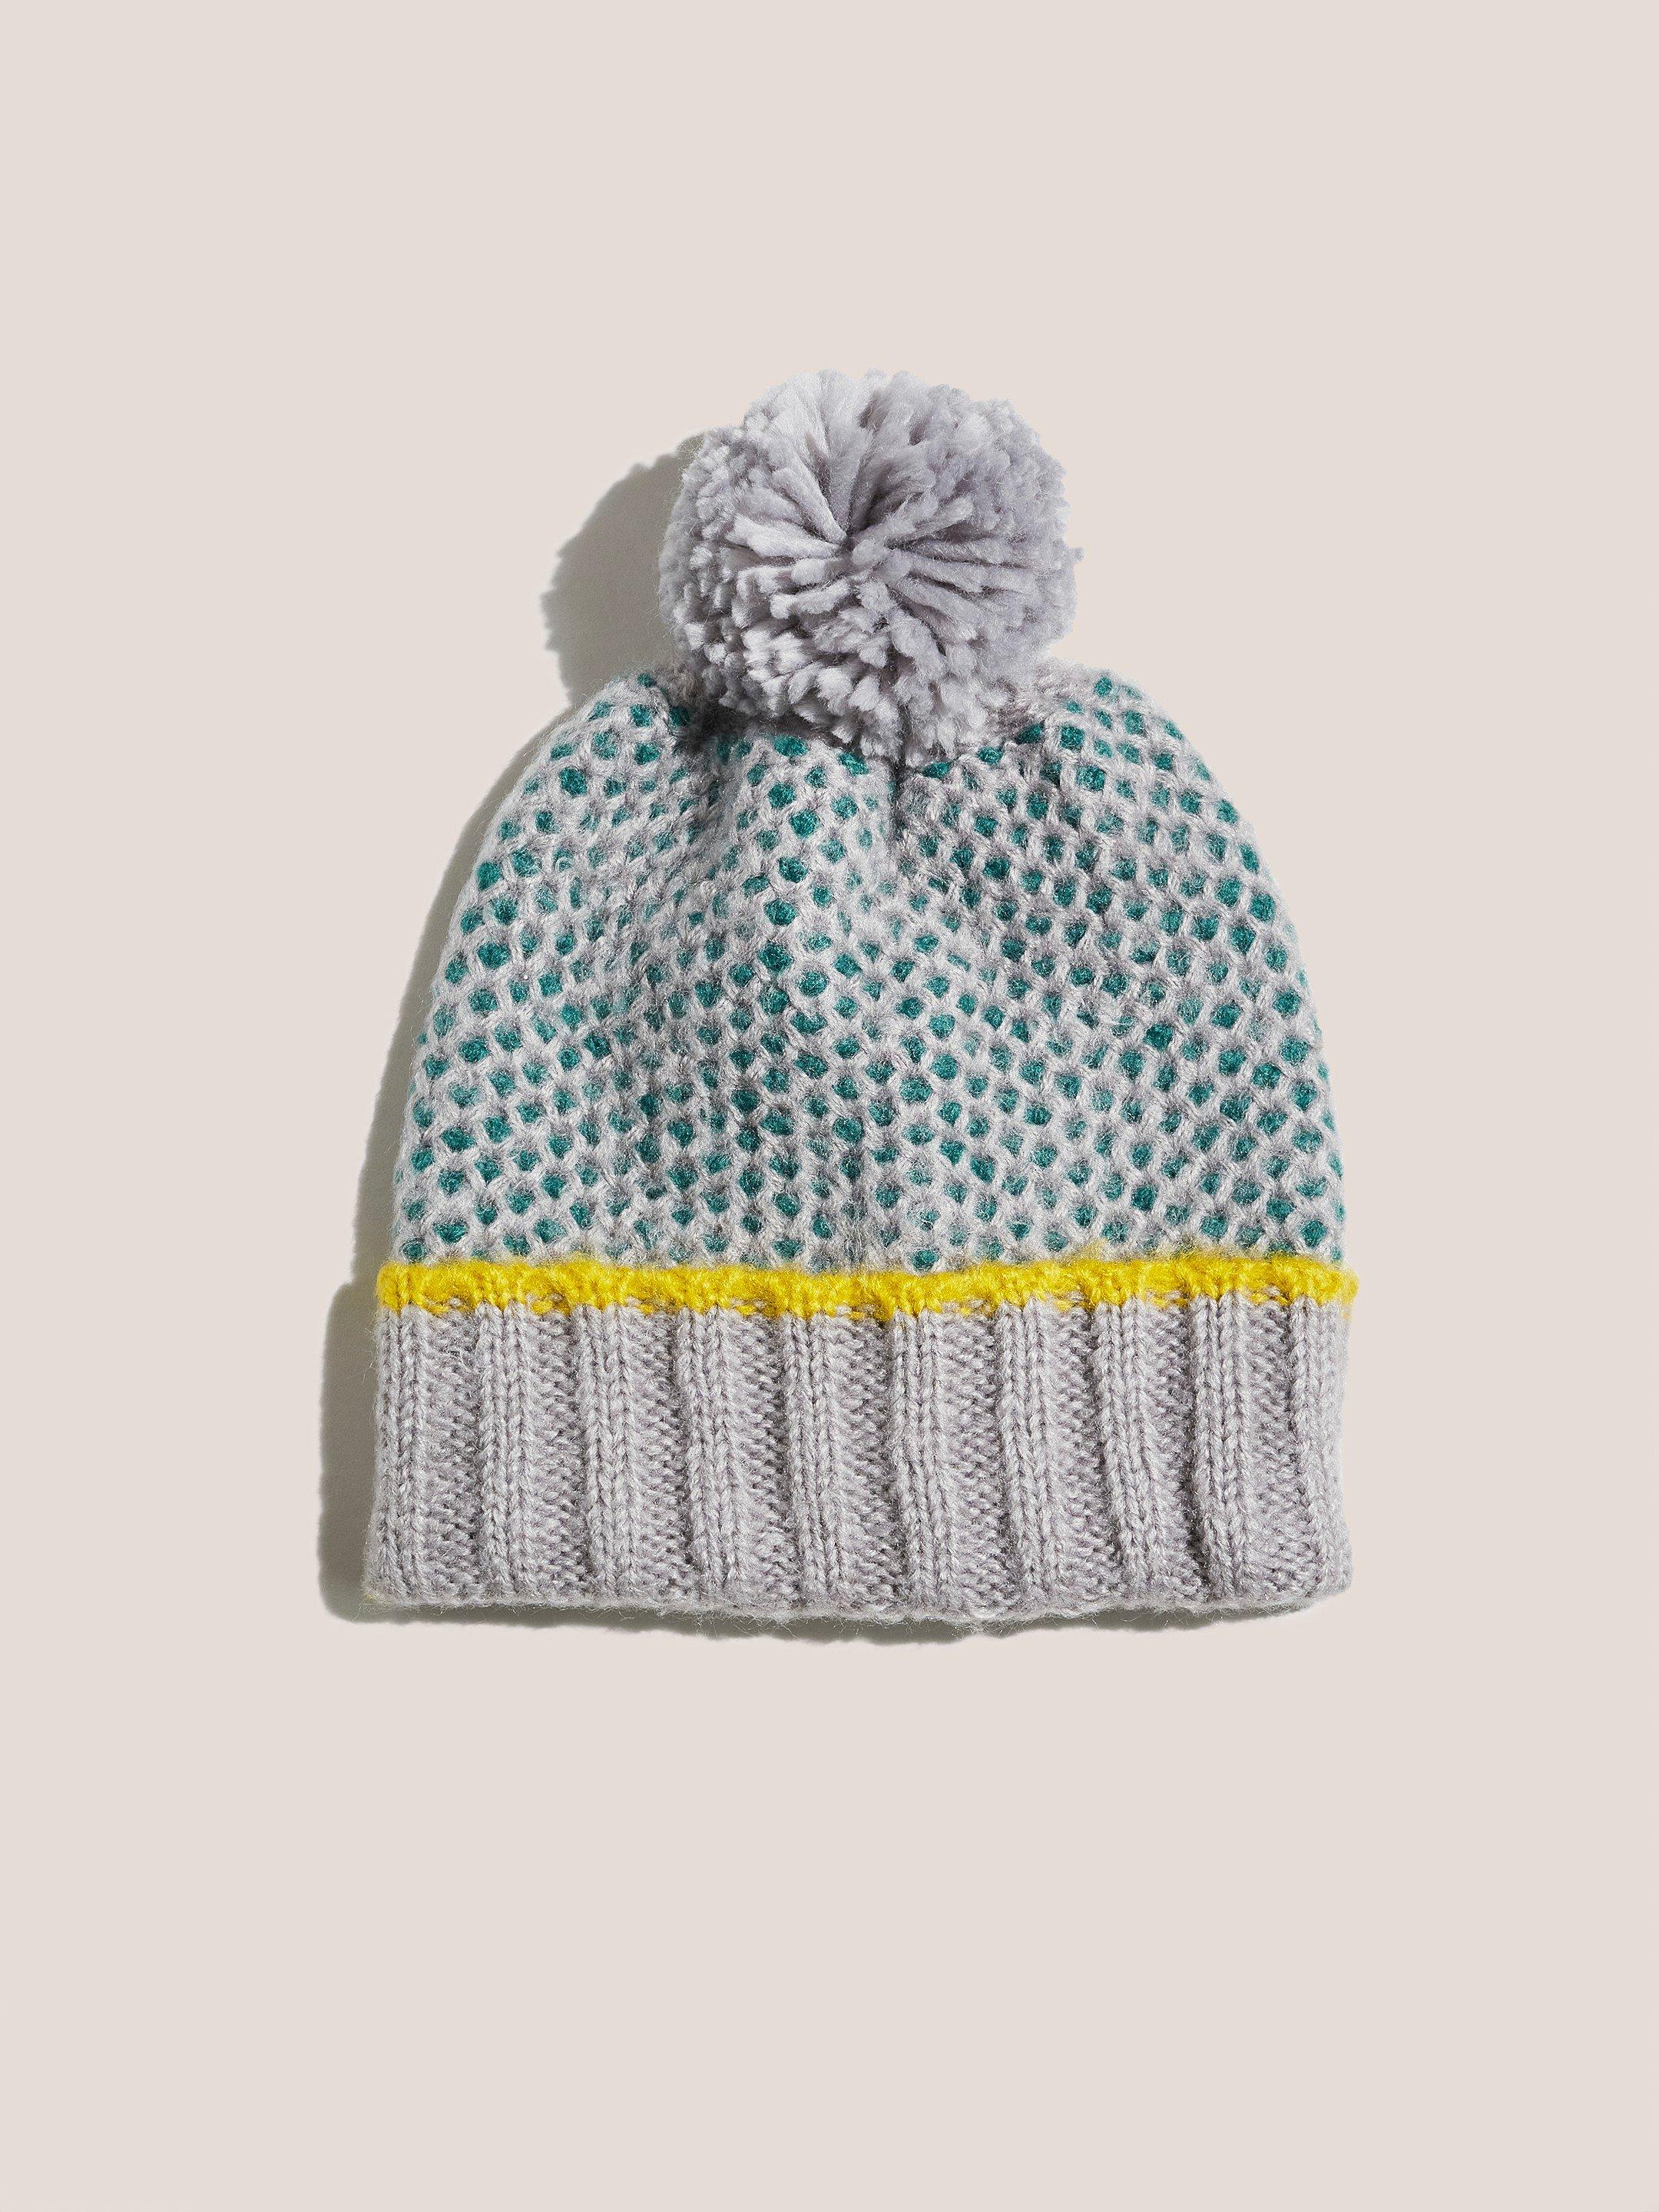 Honeycomb Knitted Hat